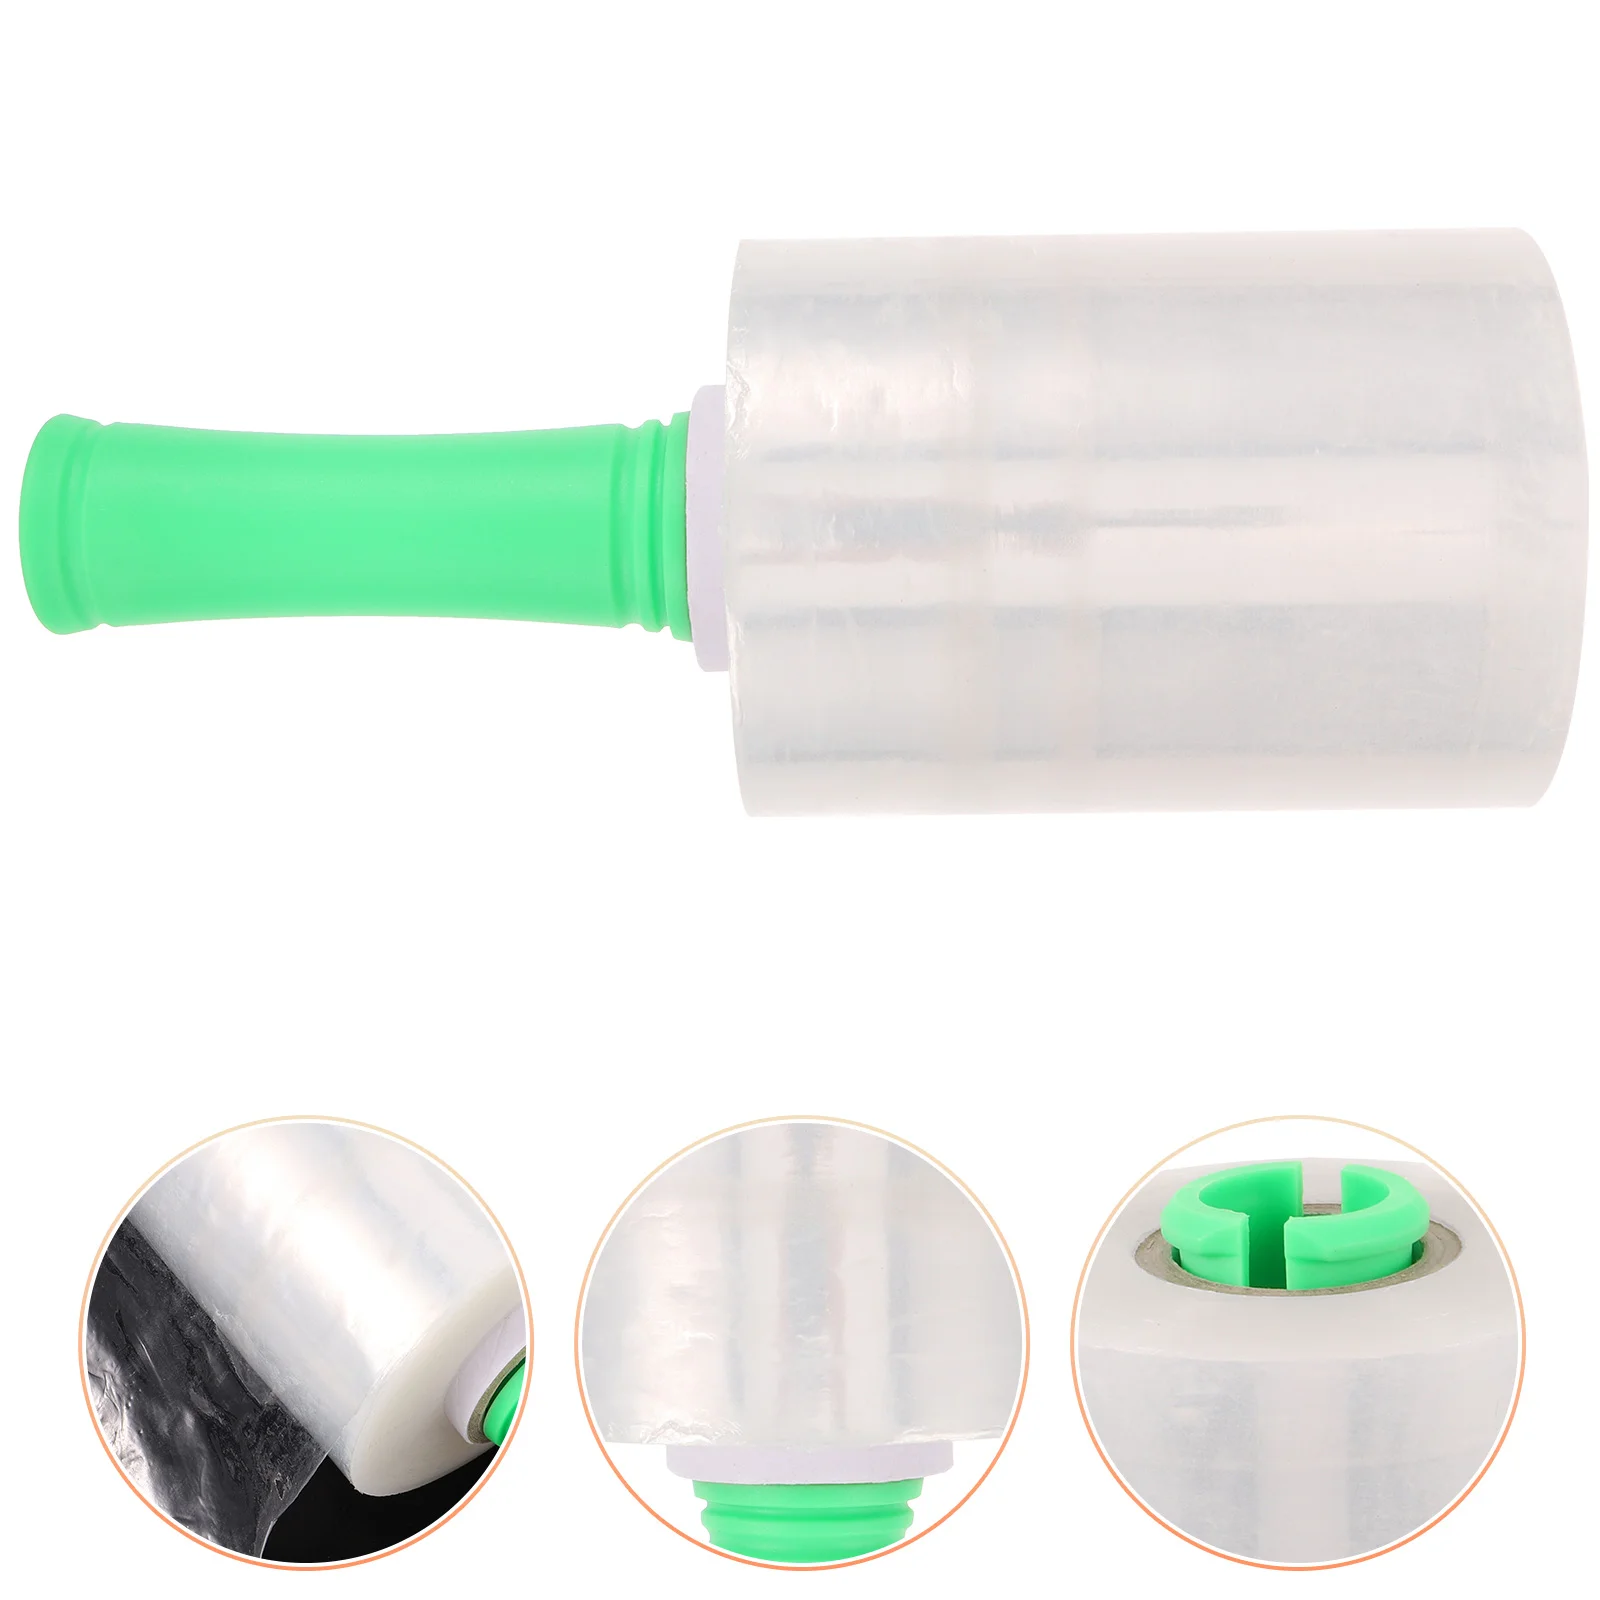 

Handle Stretch Film Moving Plastic Wrap Furniture Wrapping Packing Handles Luggage Suitcase Wraps Shrink